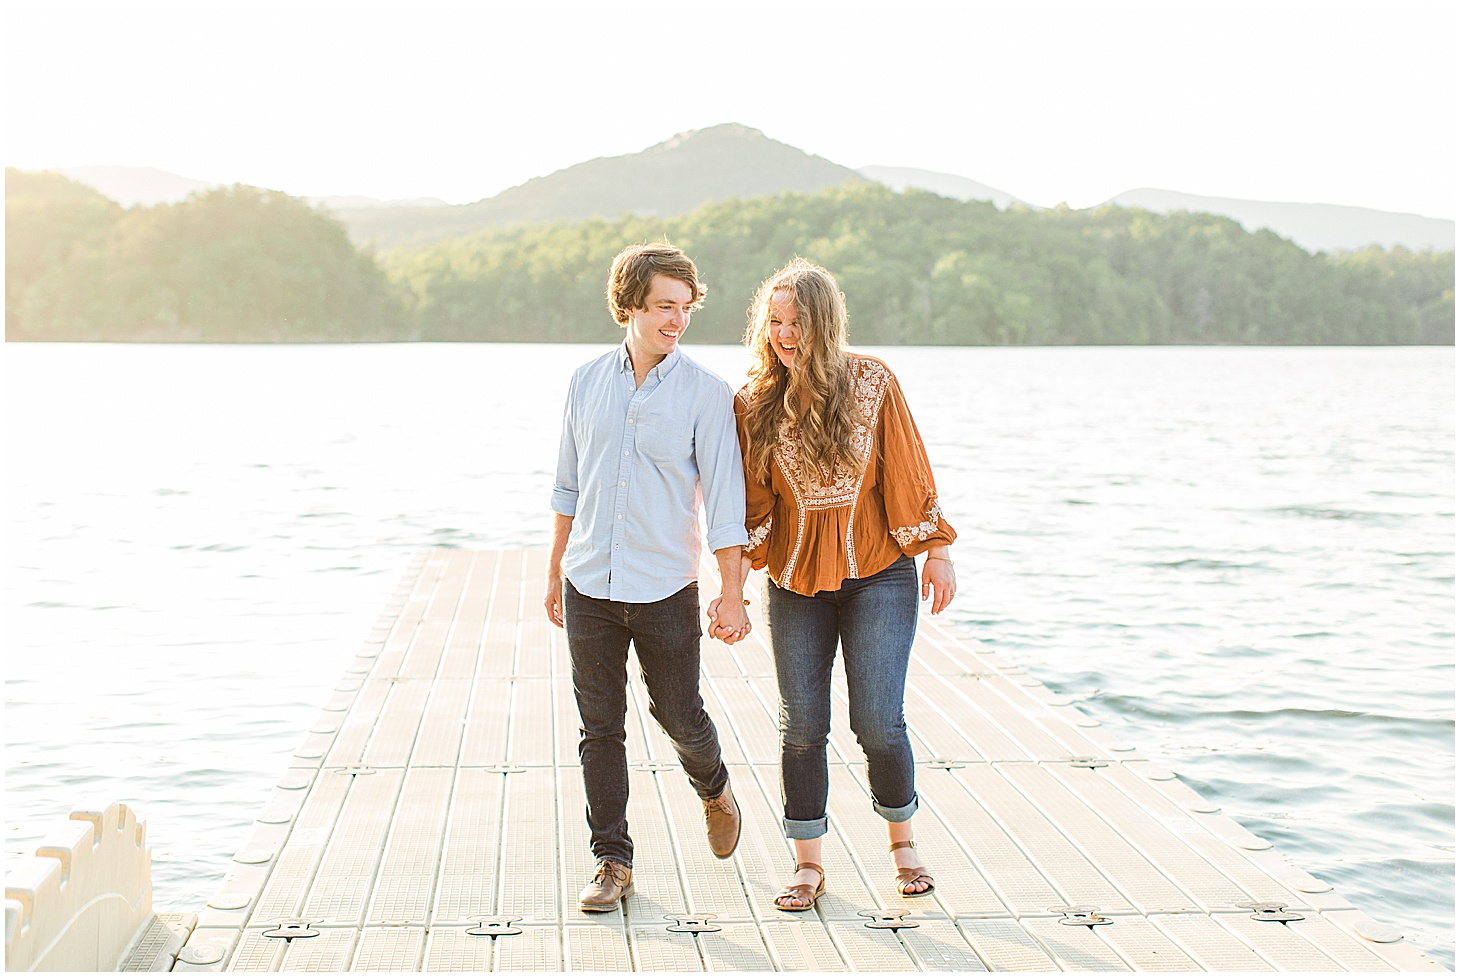 carvinscoveengagementsession_roanokeengagementsession_carvinscove_virginiawedding_virginiaweddingphotographer_vaweddingphotographer_photo_0031.jpg